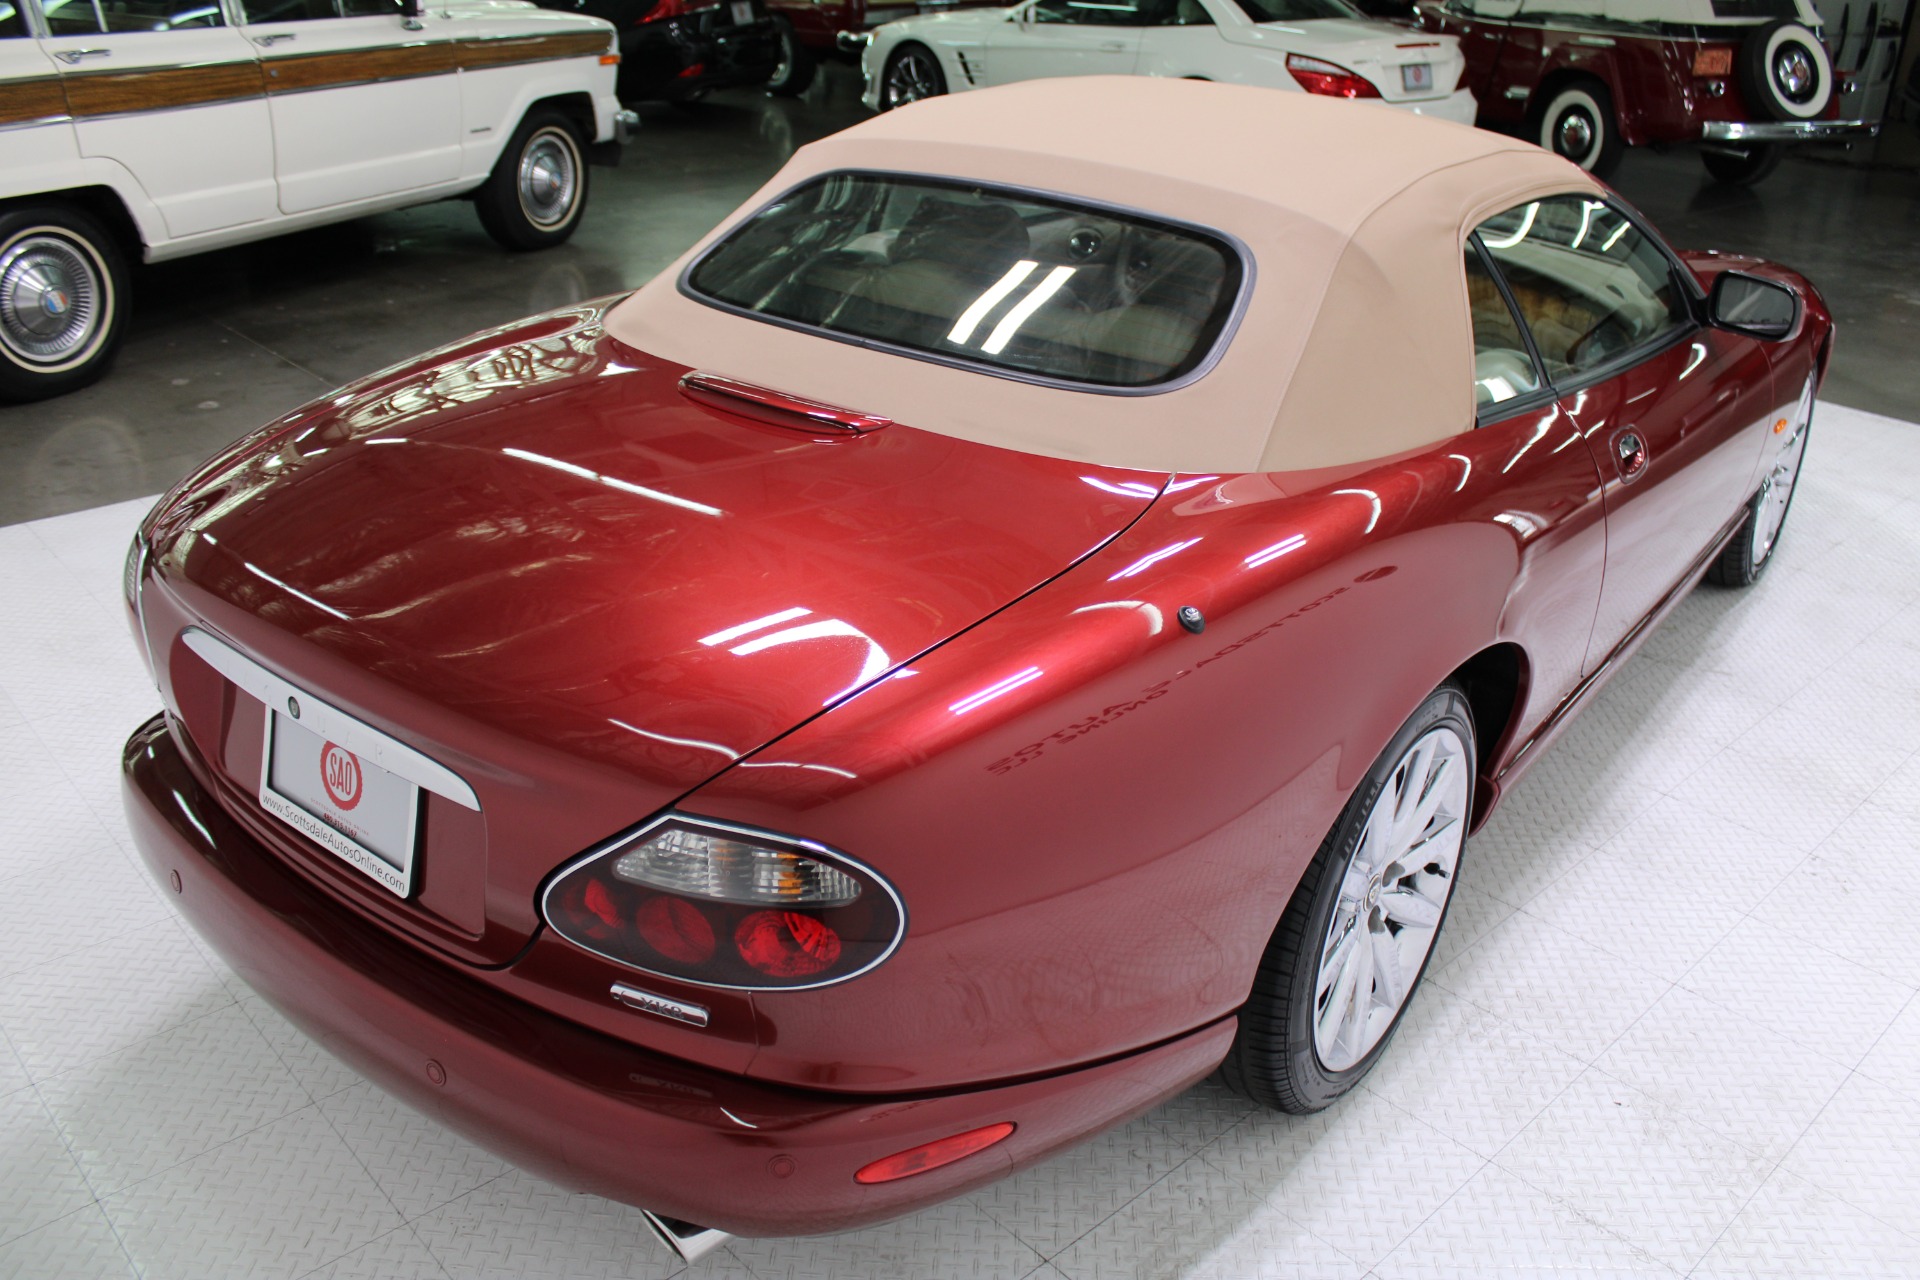 Used-2006-Jaguar-XK8-Victory-Edition-Convertible-Chevelle